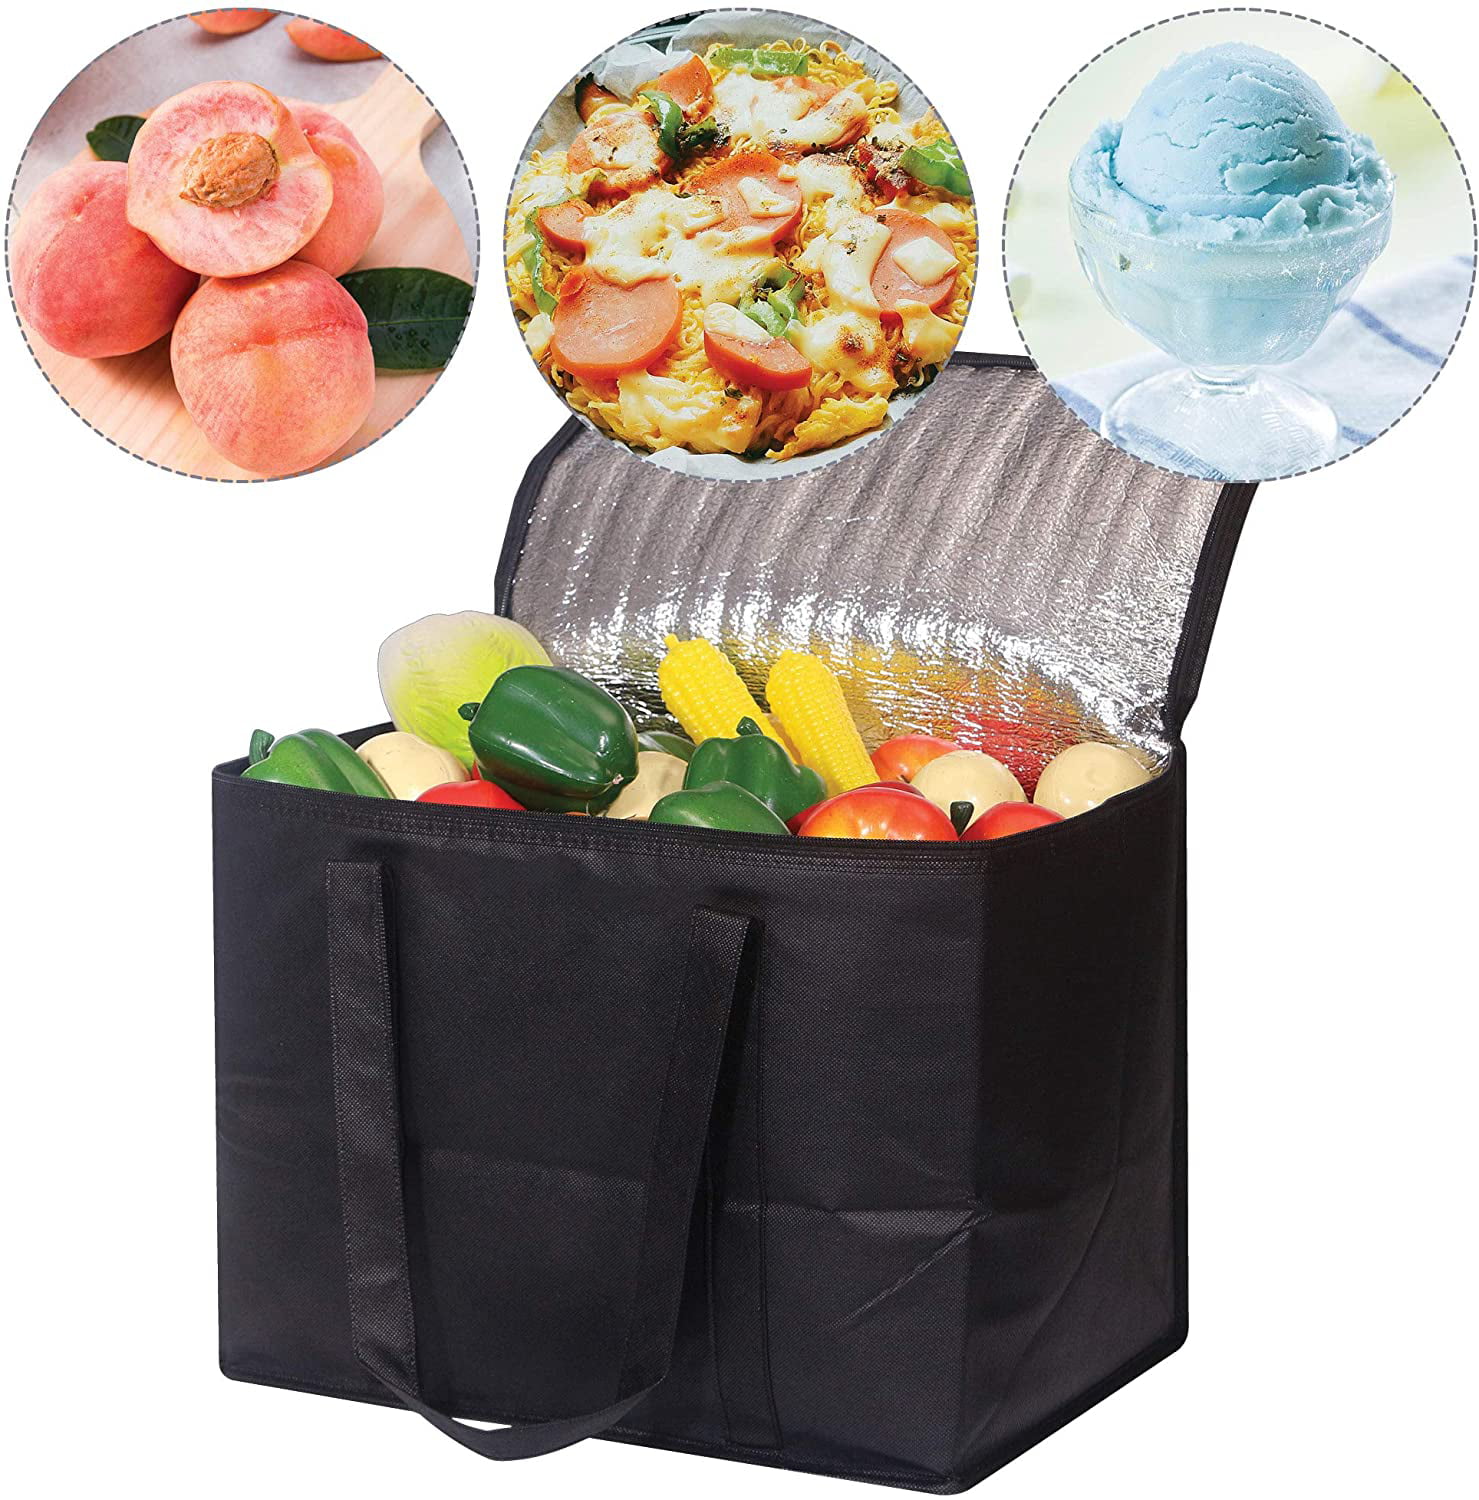  ZOOFOX Insulated Food Delivery Bag, 22 x 13 x 12 Large  Waterproof Catering Supply Bag with Zipper and Handle, Reusable Food Warmer  Bag for Uber Eats, Doordash, Restaurants, Catering : Industrial